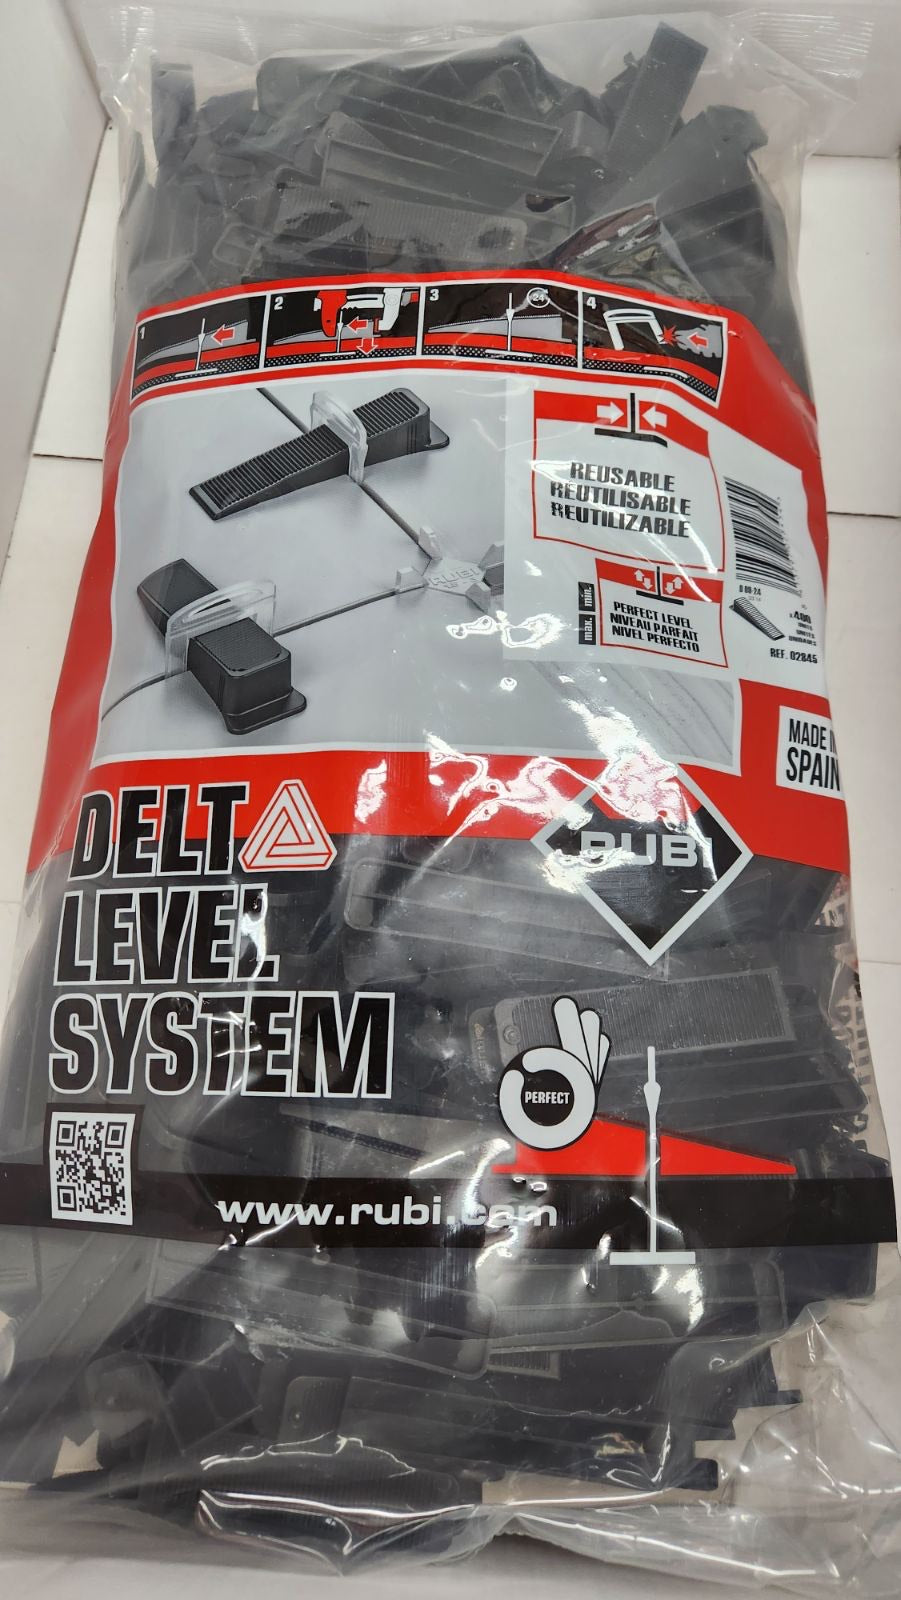 Rubi Delta Leveling Wedges 400 Pieces